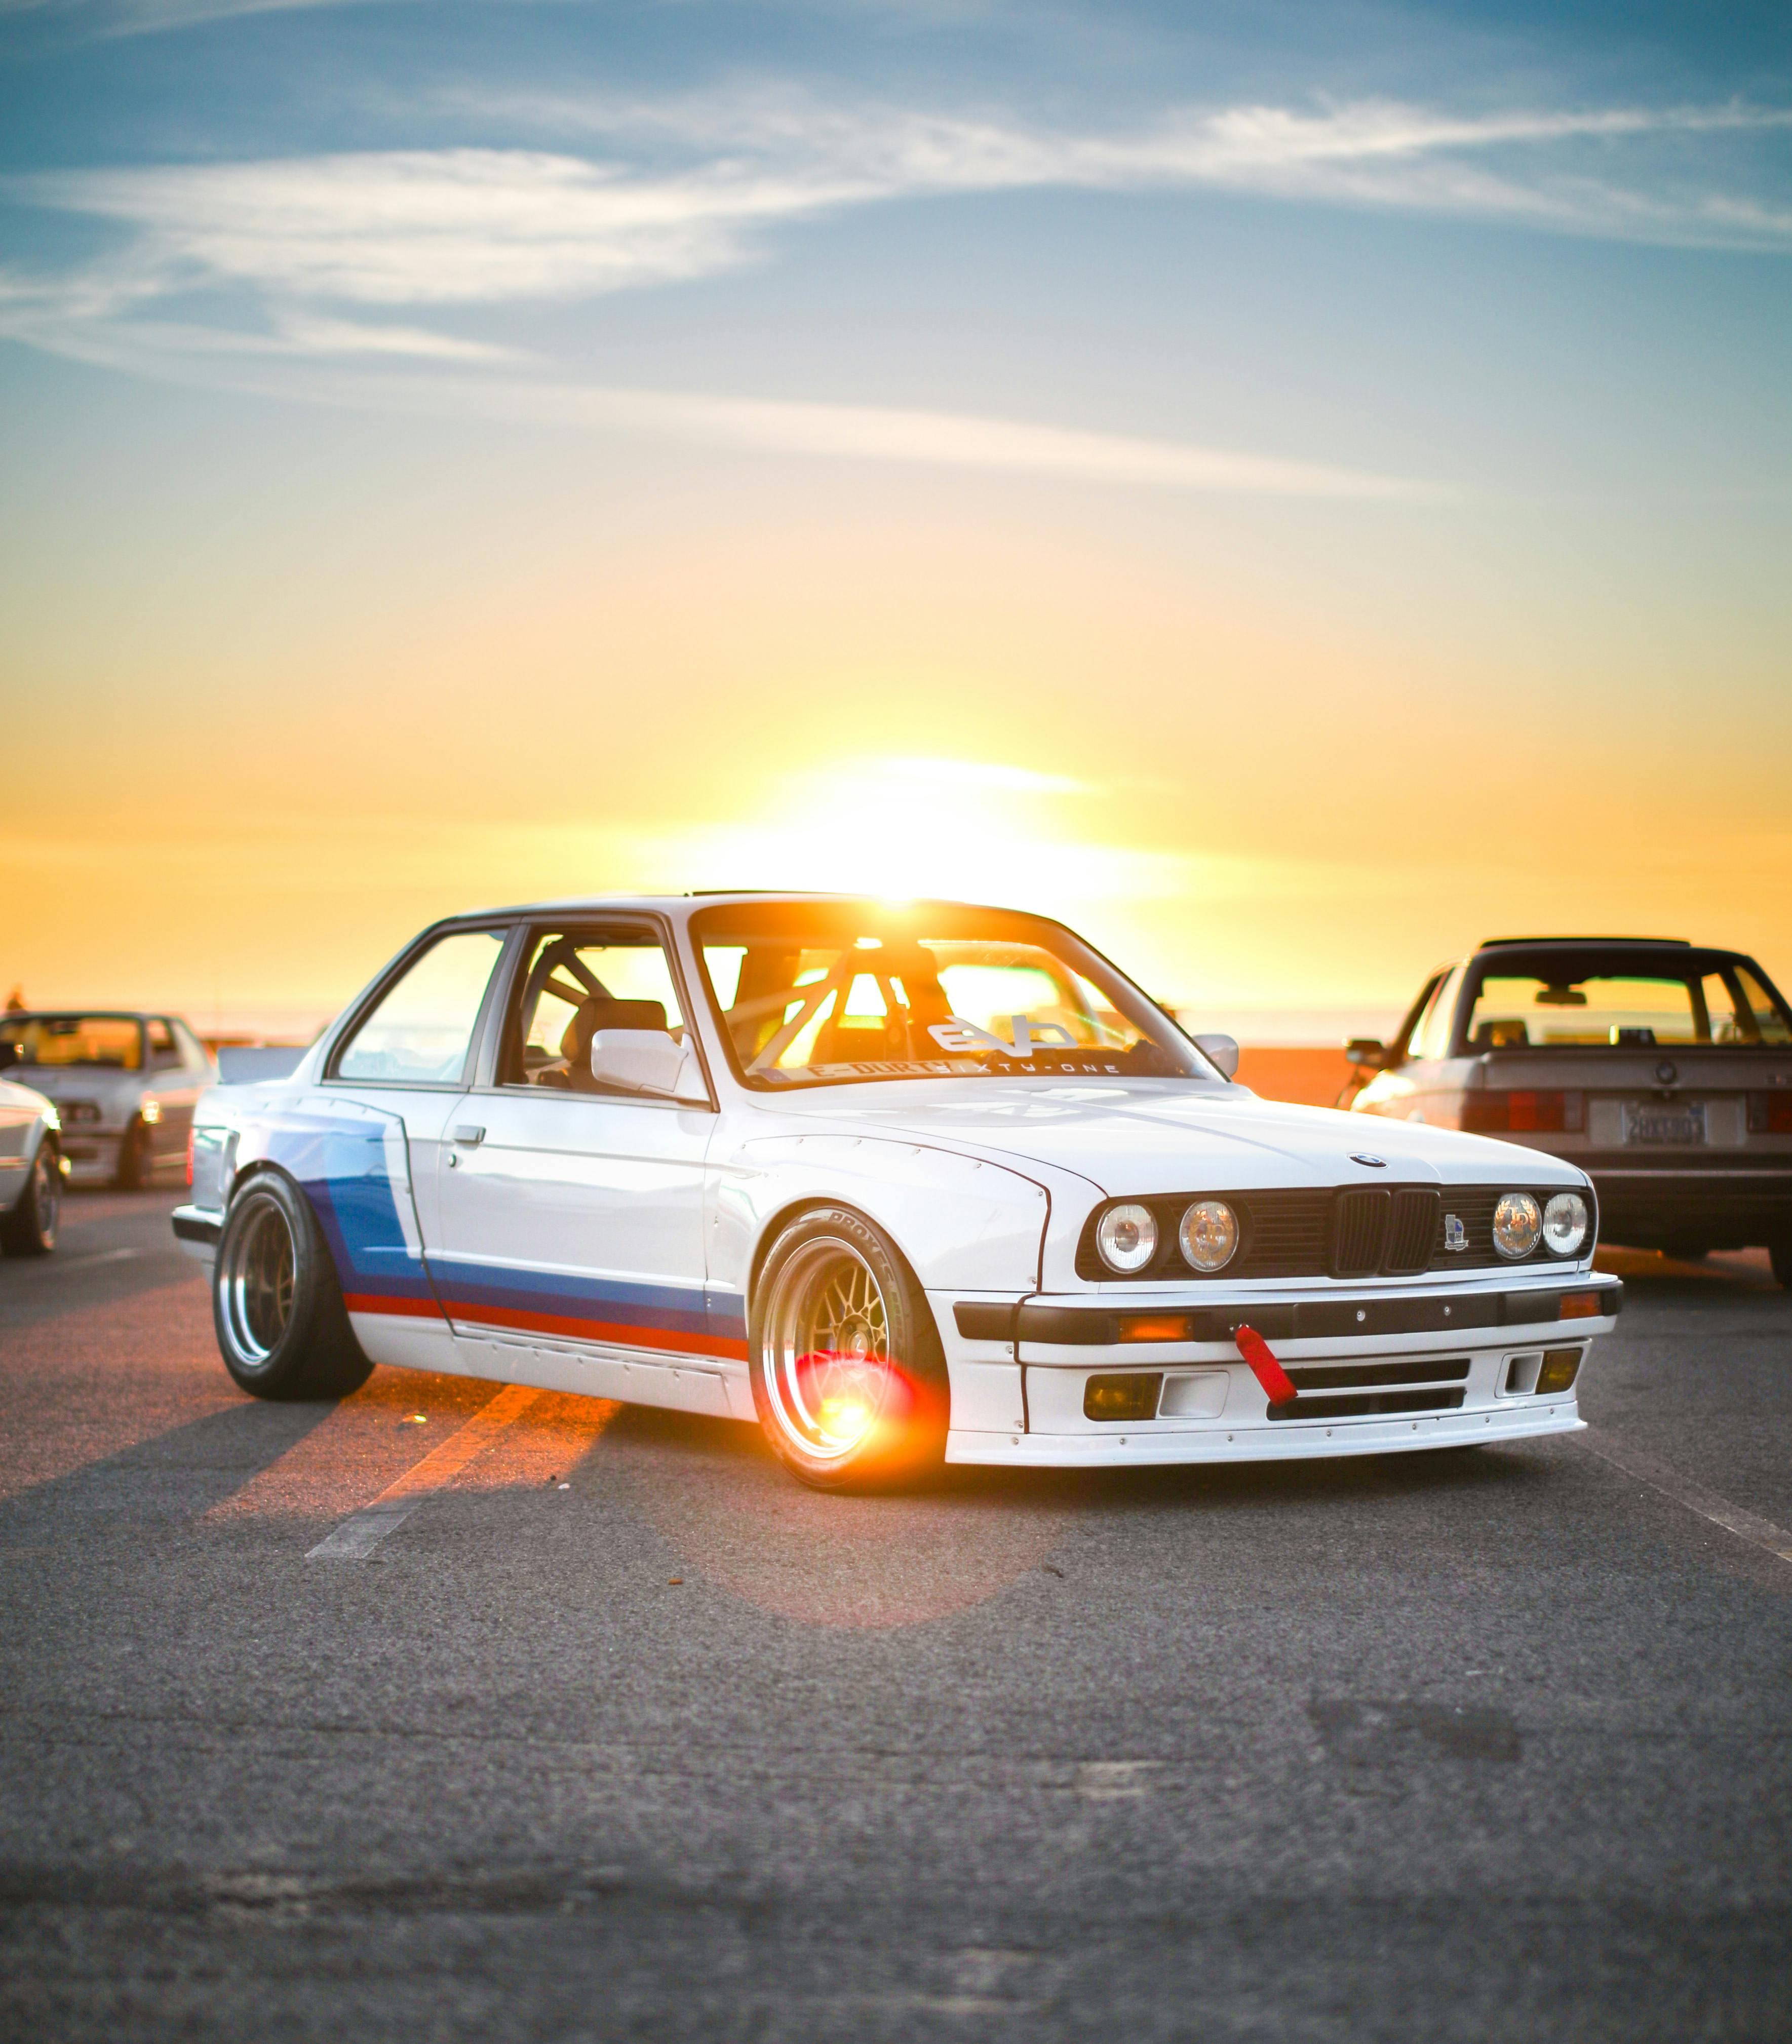 White Bmw Sports Car On A Parking Lot During Sunset Free Stock Photo